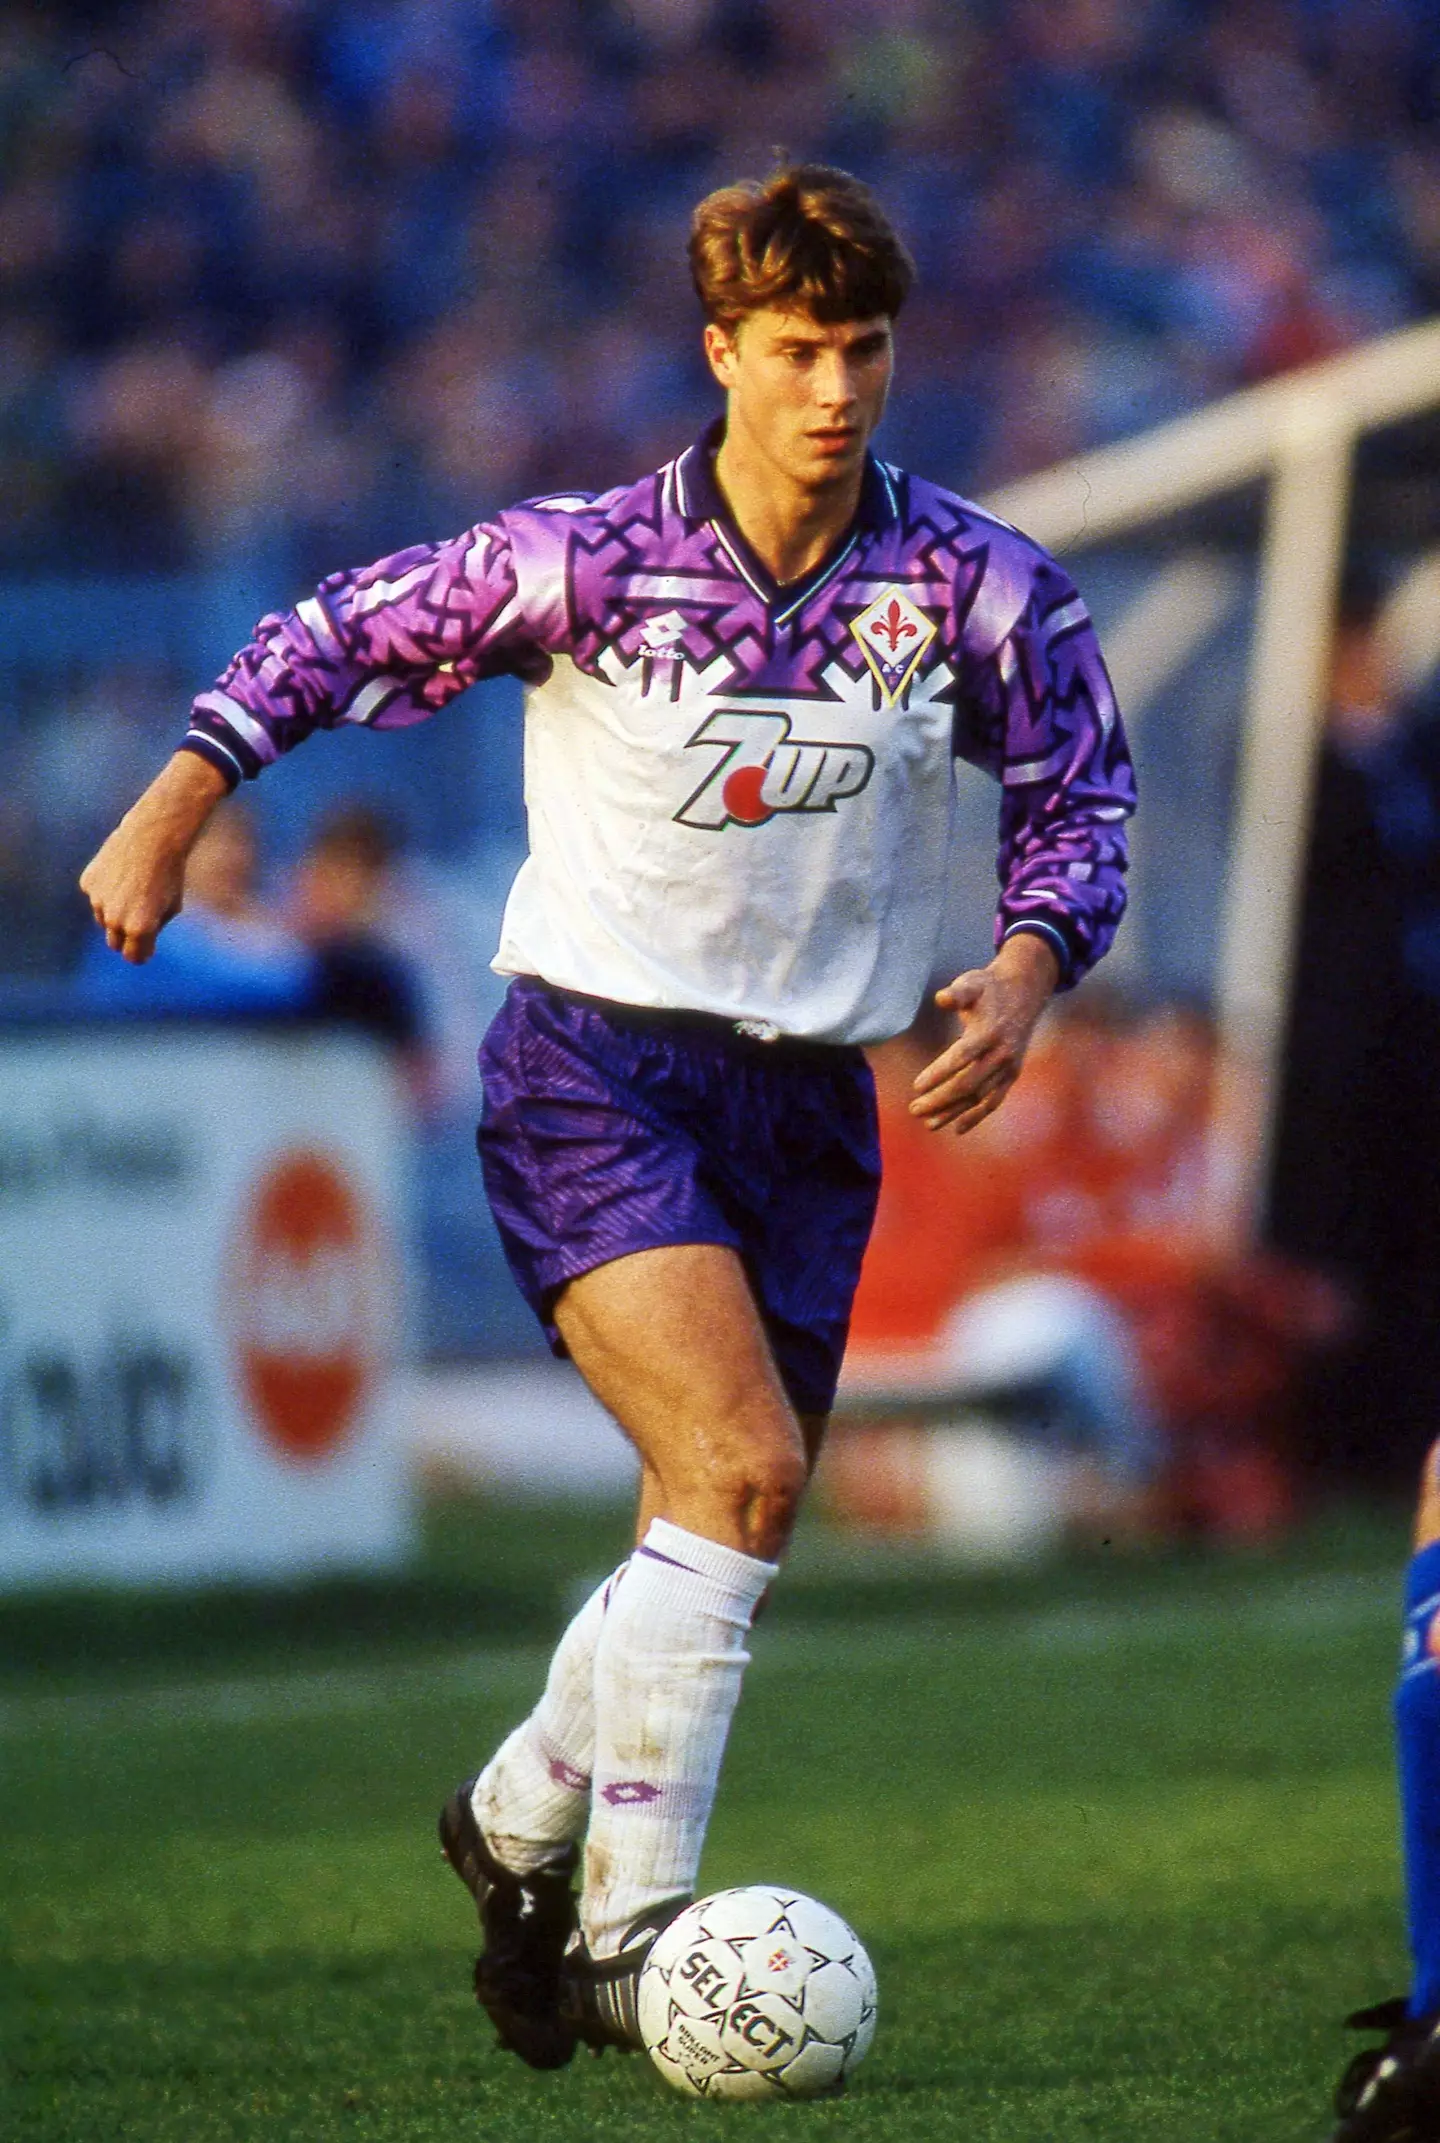 The banned Fiorentina away shirt is one of football's most controversial kits.